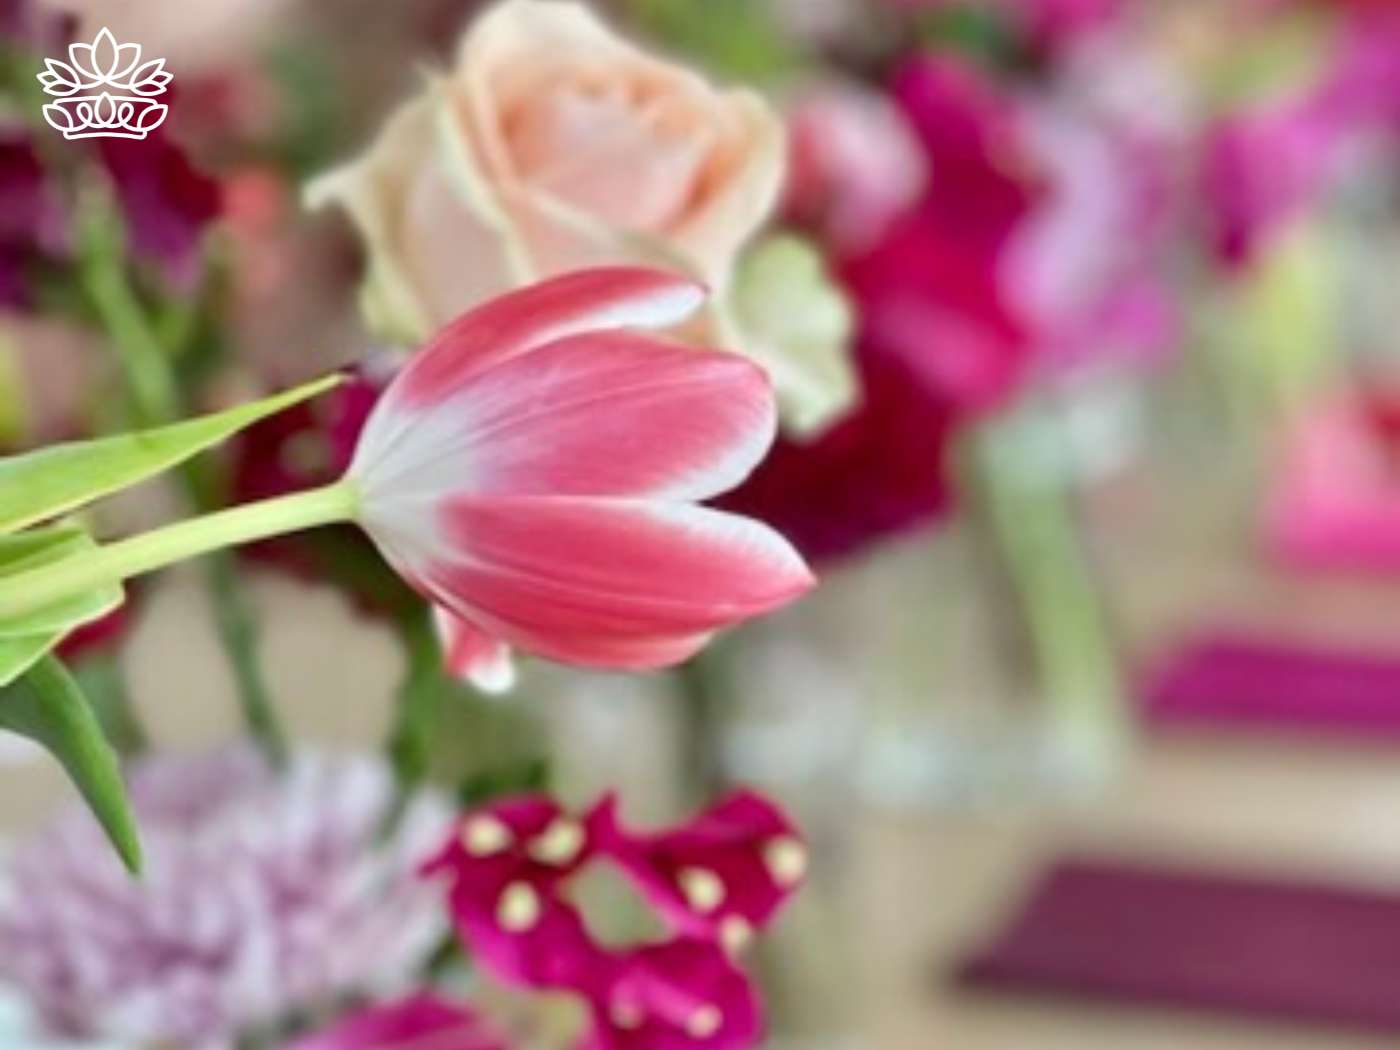 Soft-focused image of a tulip, part of a peaceful and celebratory Eid Mubarak floral display expressing the joy of Happy Eid, invoking blessings from Allah, featured in the Eid Flowers Collection by Fabulous Flowers and Gifts.